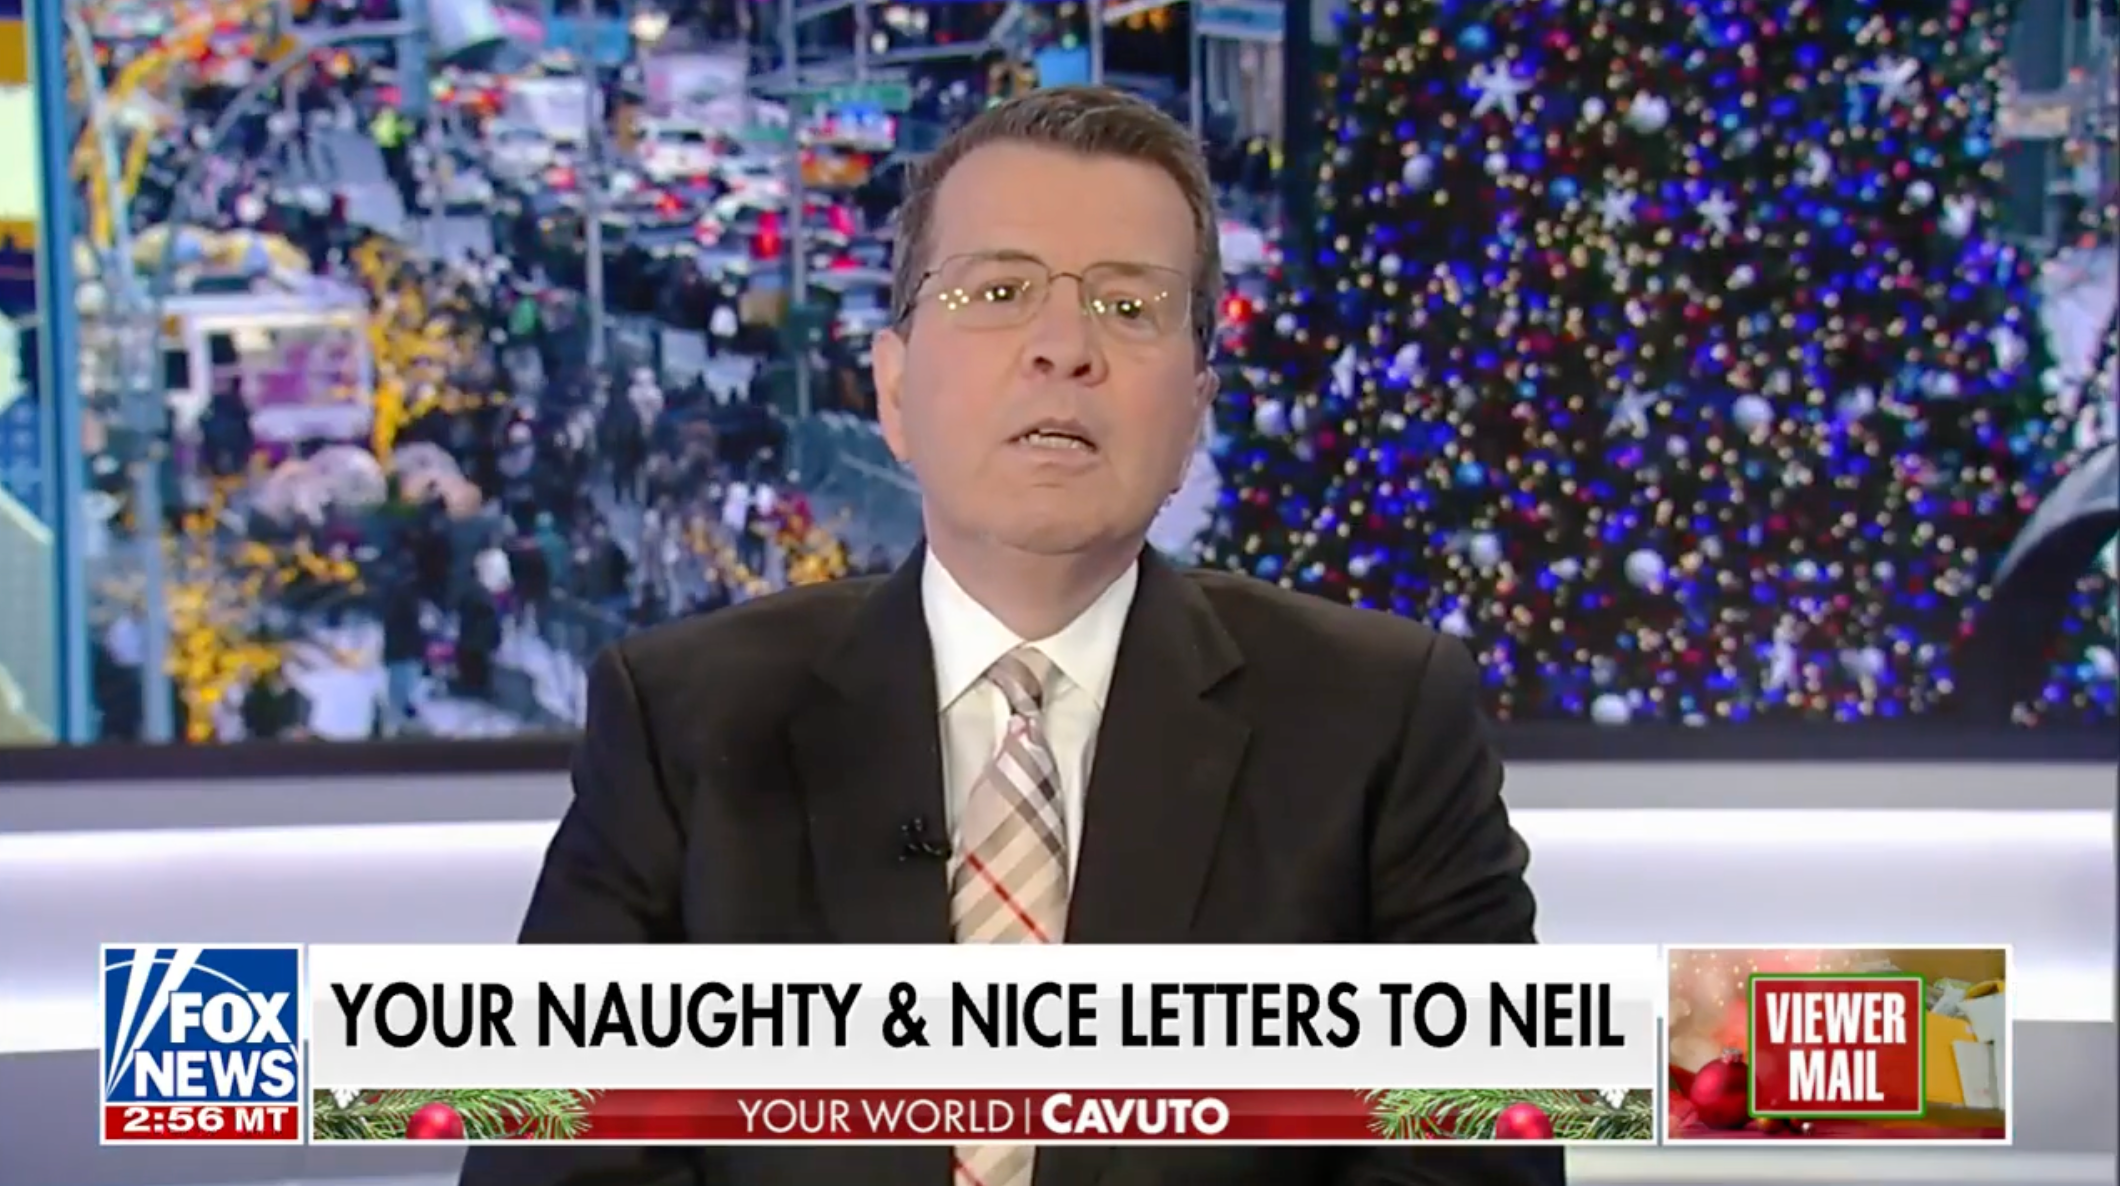 Neil Cavuto responds to viewers who sent him hate mail for refusing to deny the results of the 2020 election.